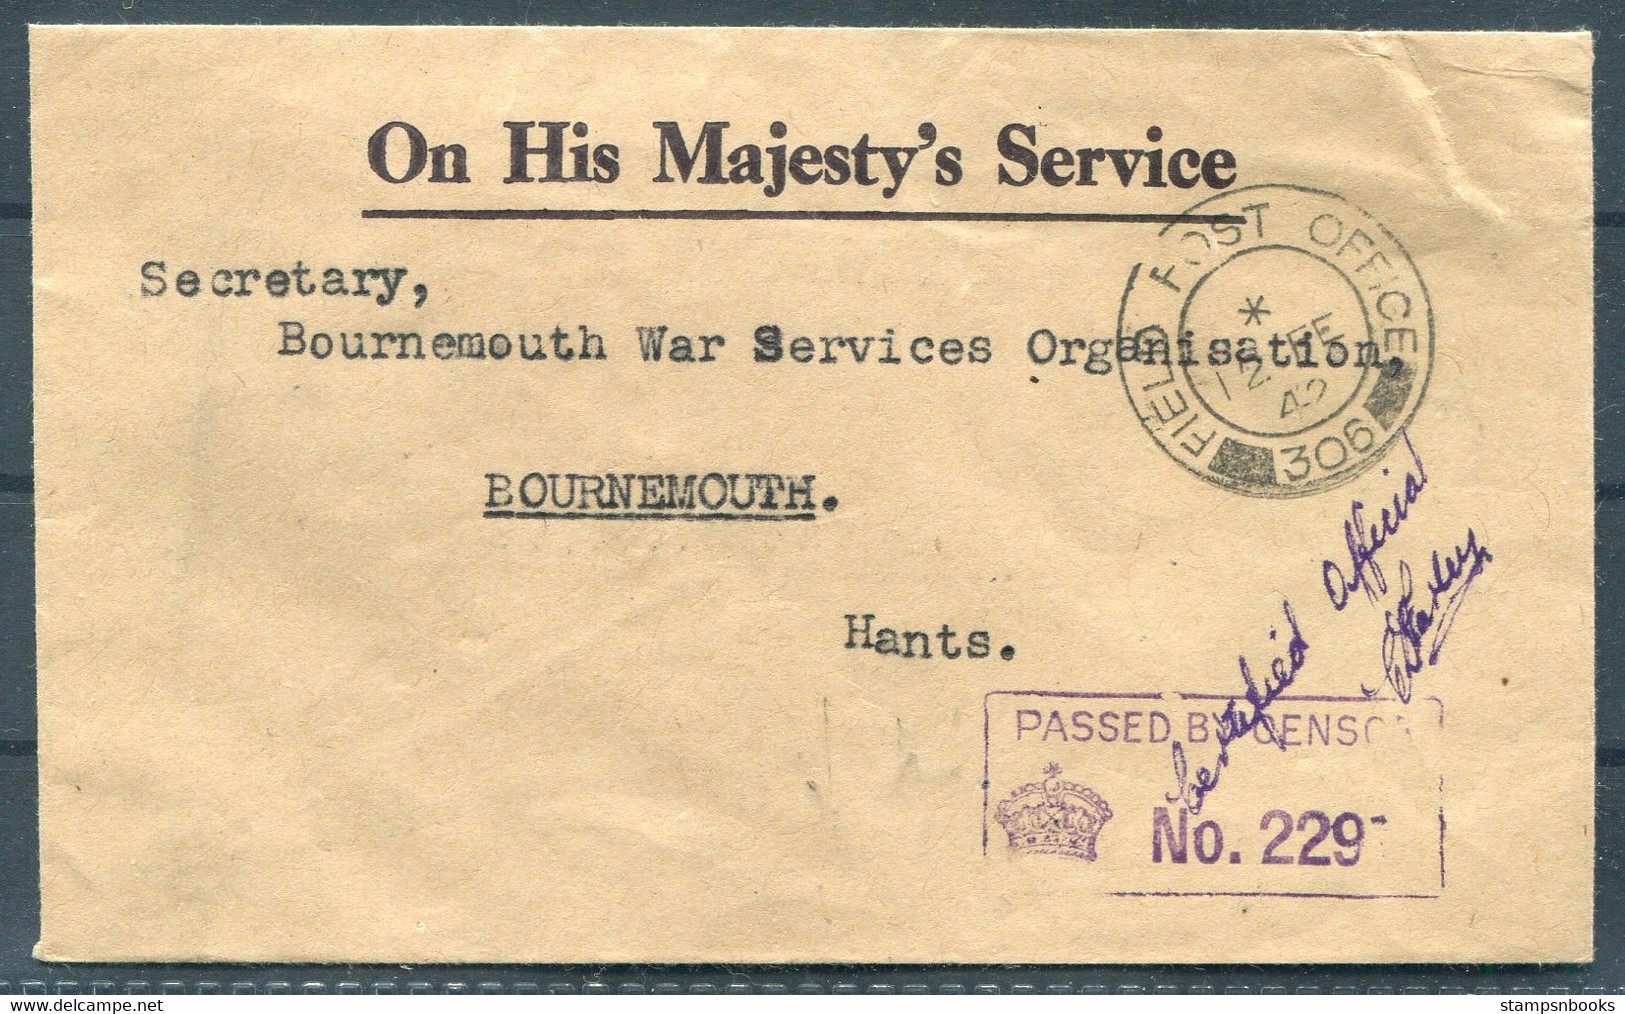 1942 Iceland Field Post Office FPO 306 O.H.M.S. "Certified Official" Censor Cover, Bournemouth War Service Organisation - Lettres & Documents